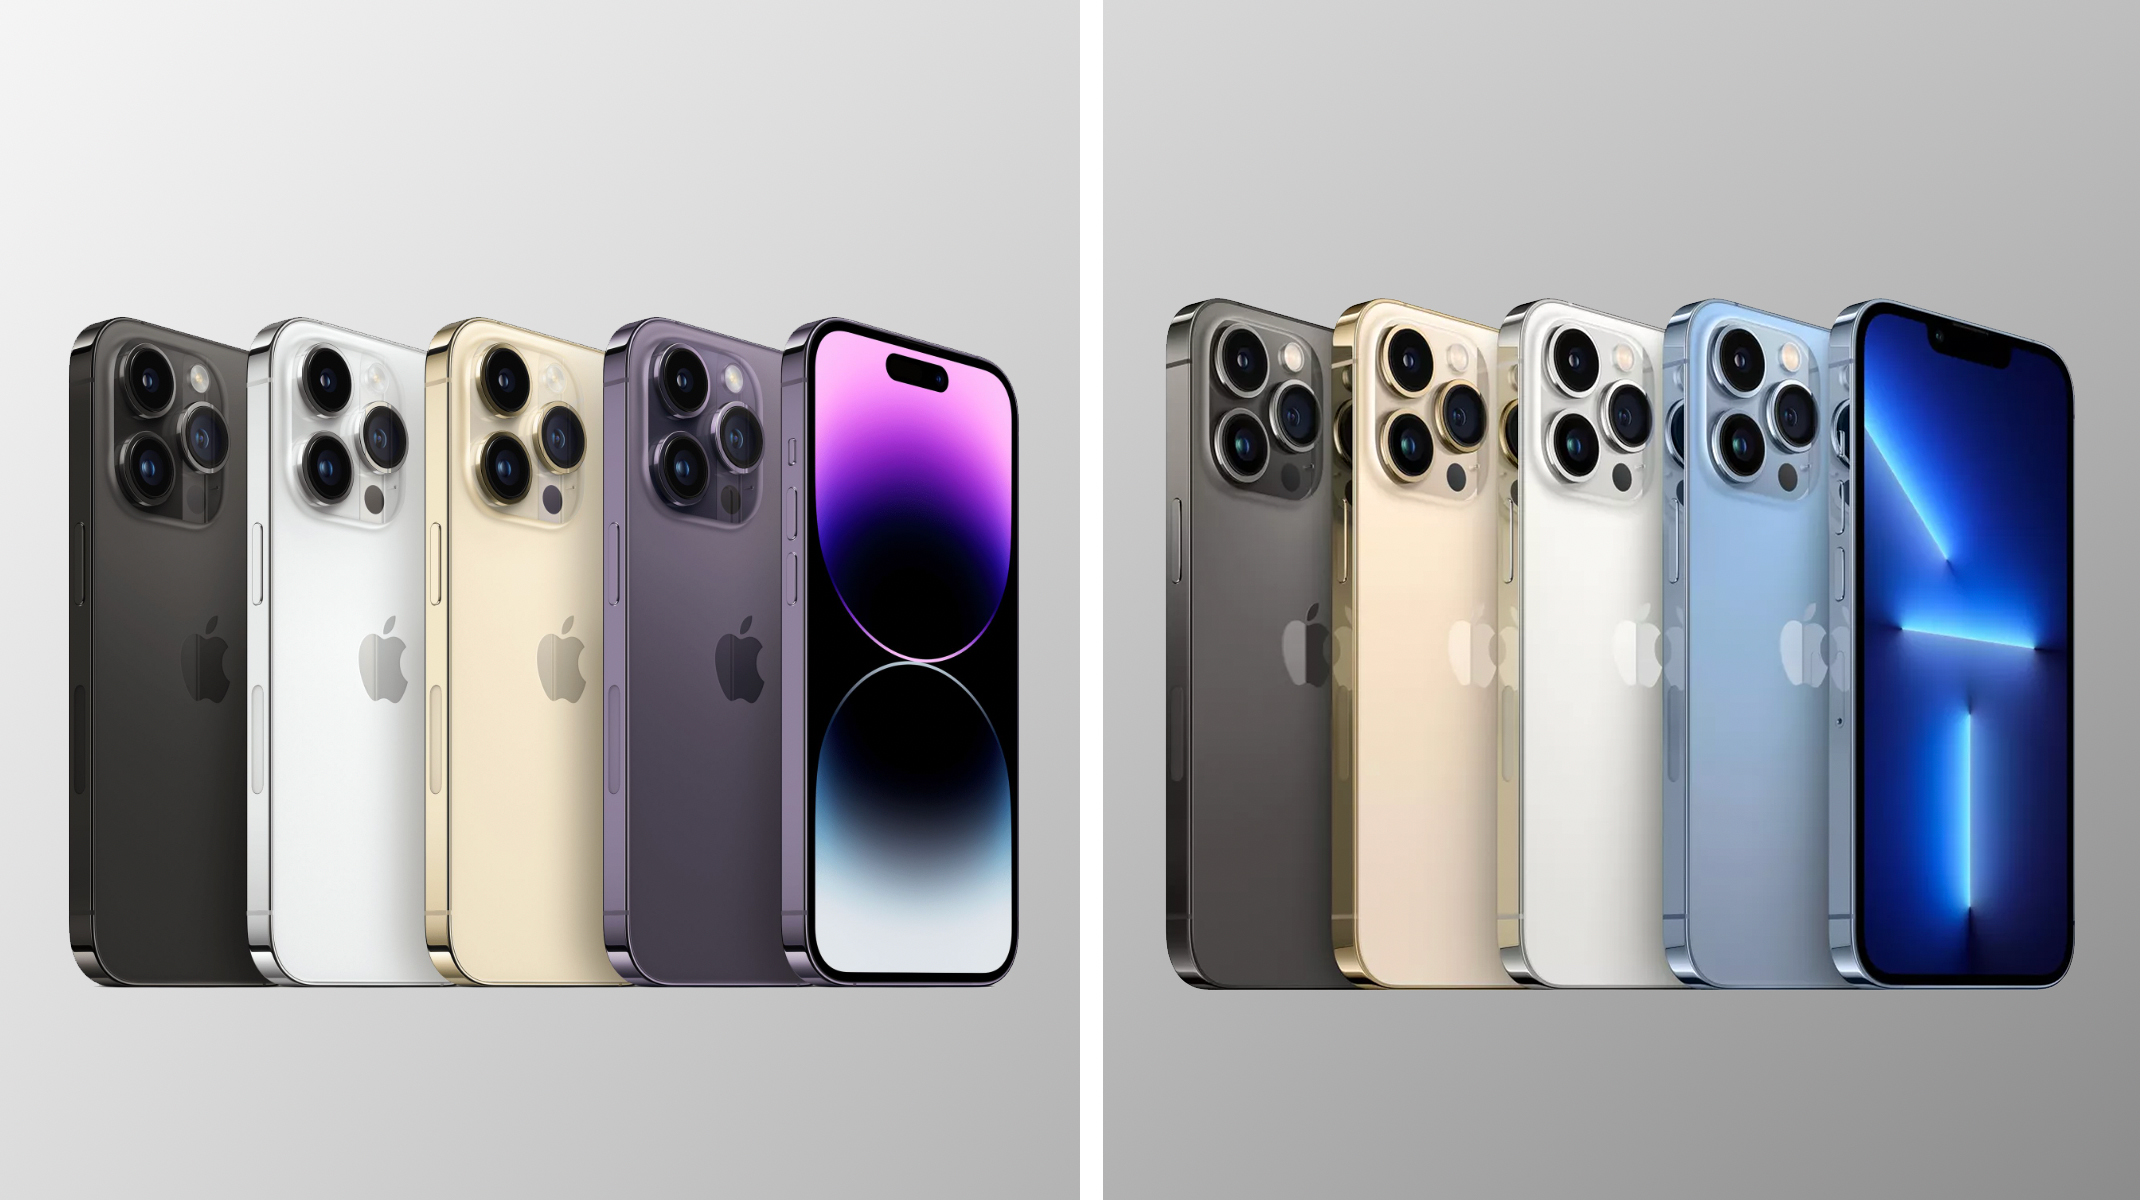 Apple iPhone 14 Pro and iPhone 13 Pro colors